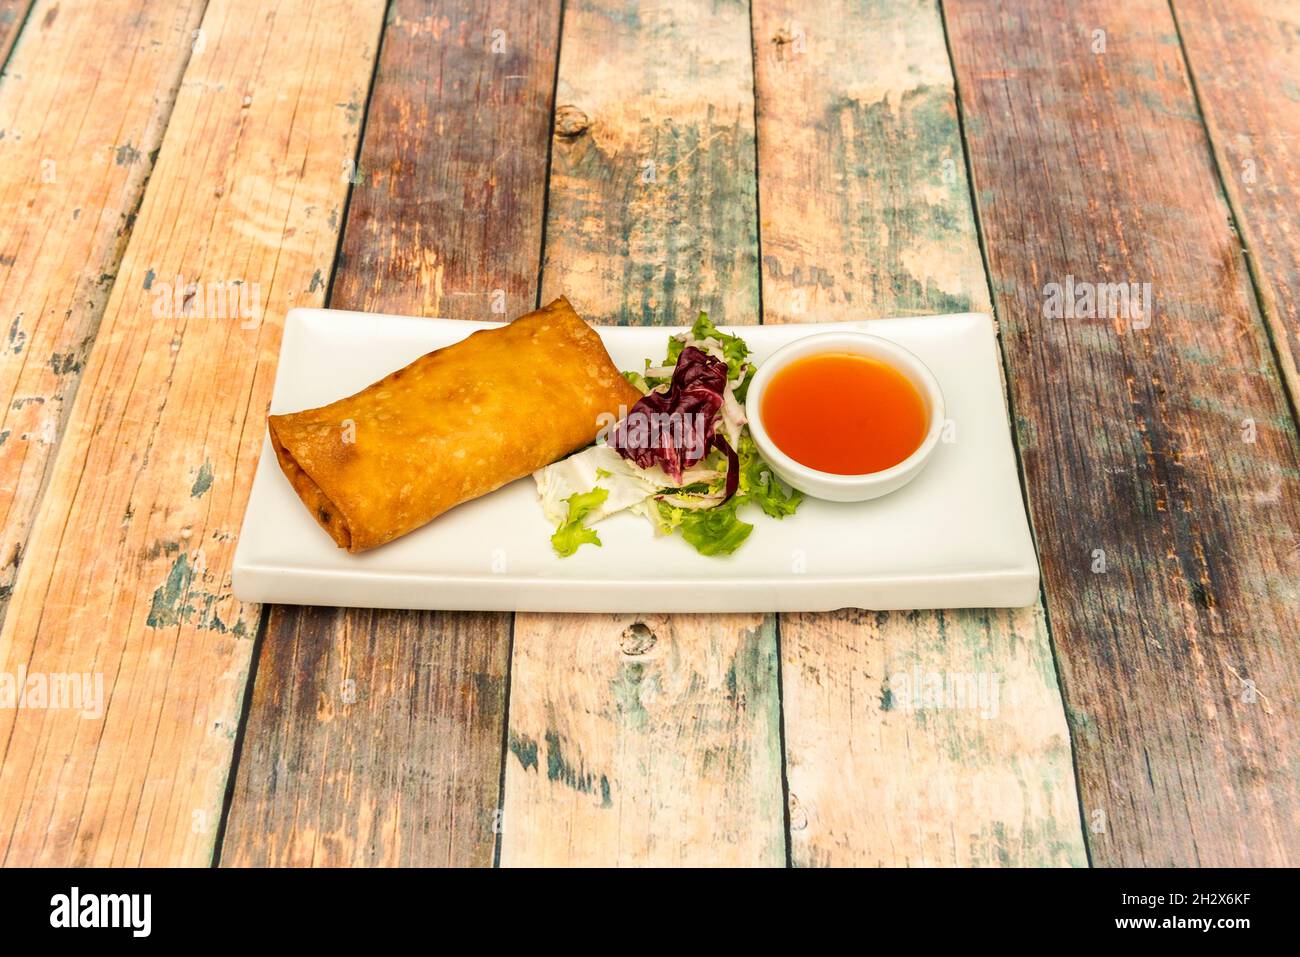 Delicious crispy spring roll stuffed with vegetables and minced meat fried in olive oil with sweet and sour sauce to garnish Stock Photo